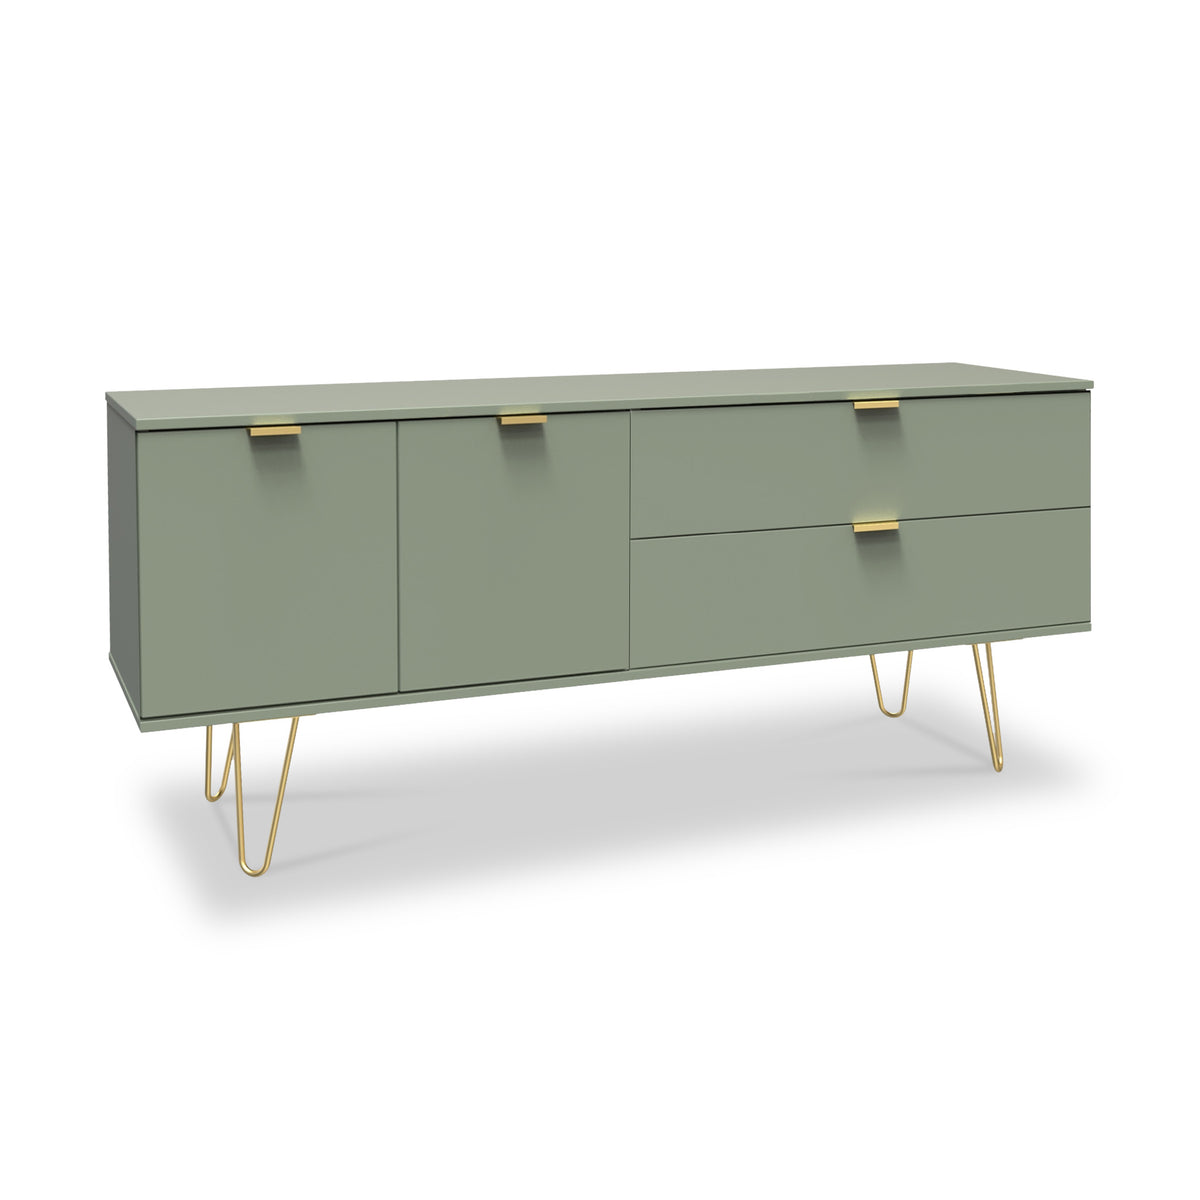 Moreno Olive Green 2 Door 2 Drawer Sideboard Cabinet with gold hairpin legs from Roseland Furniture